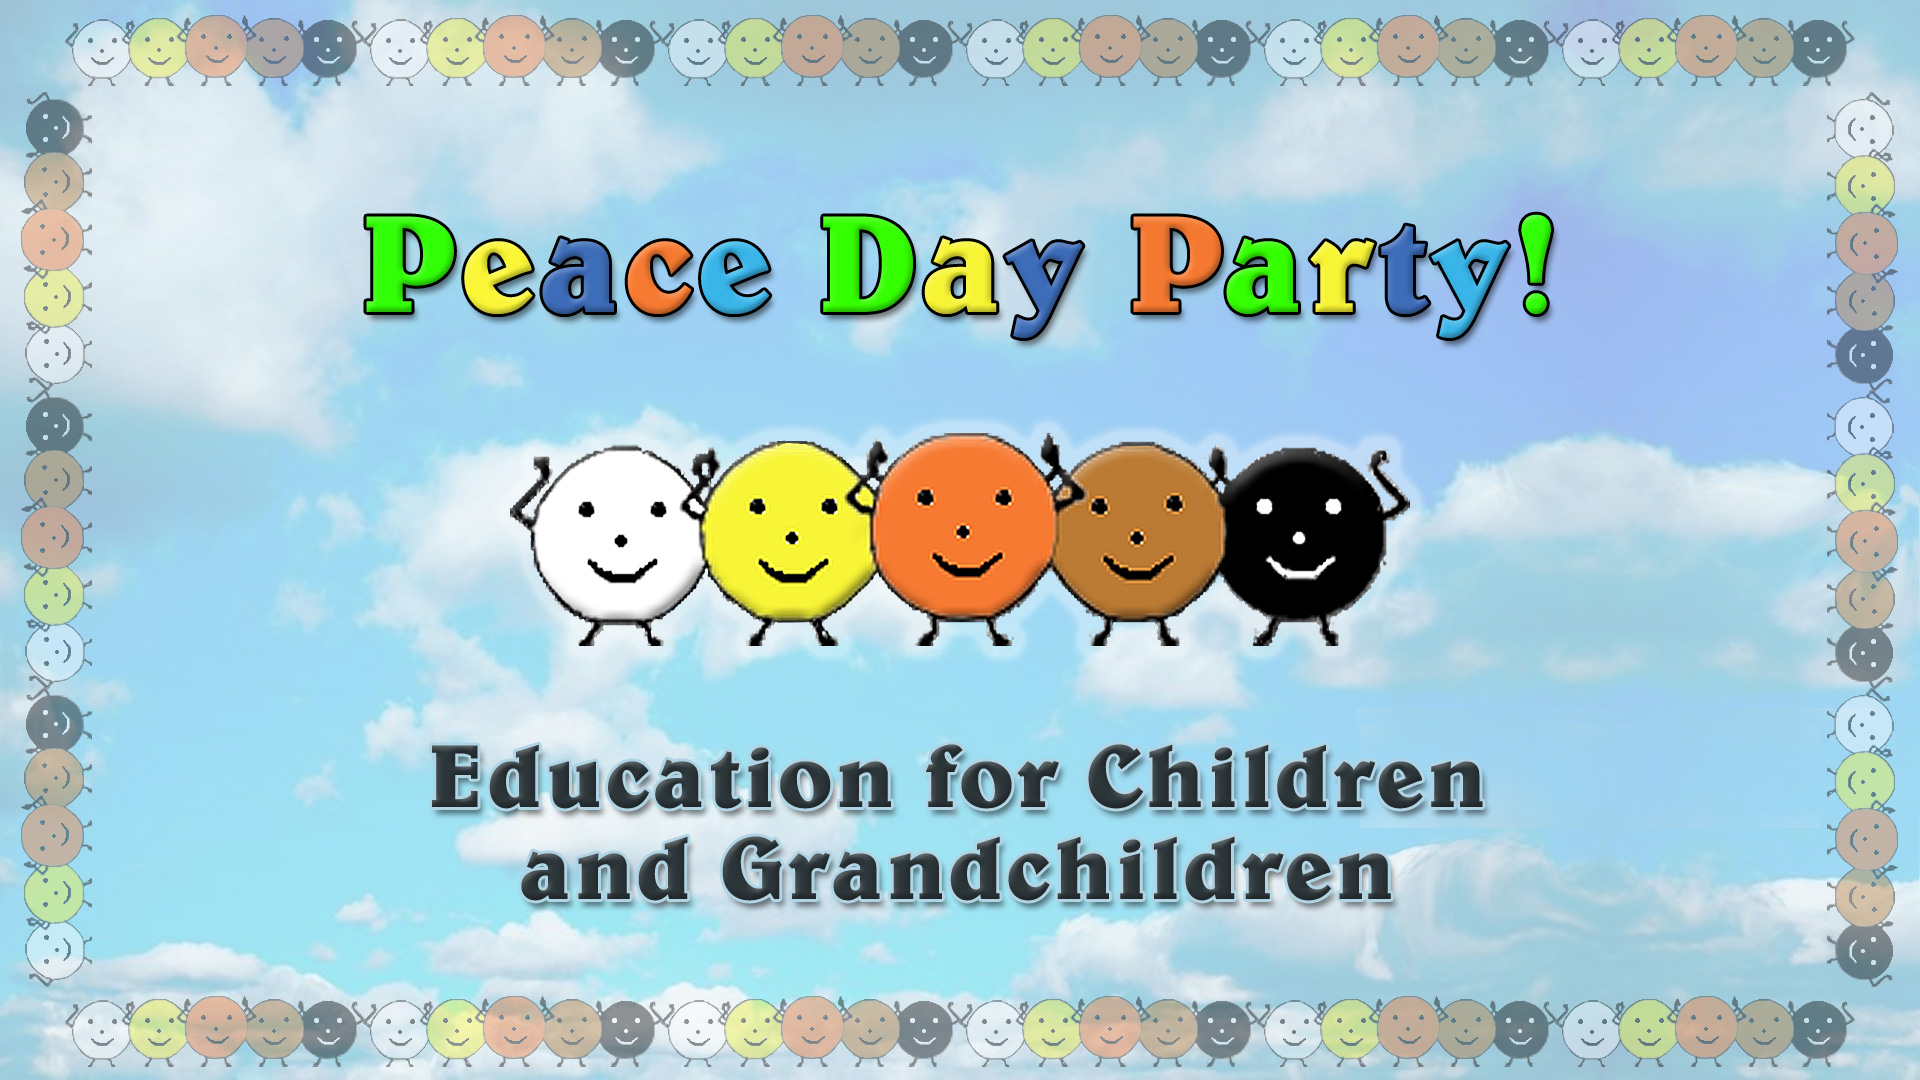 peaced-day-party-children-1920x1080